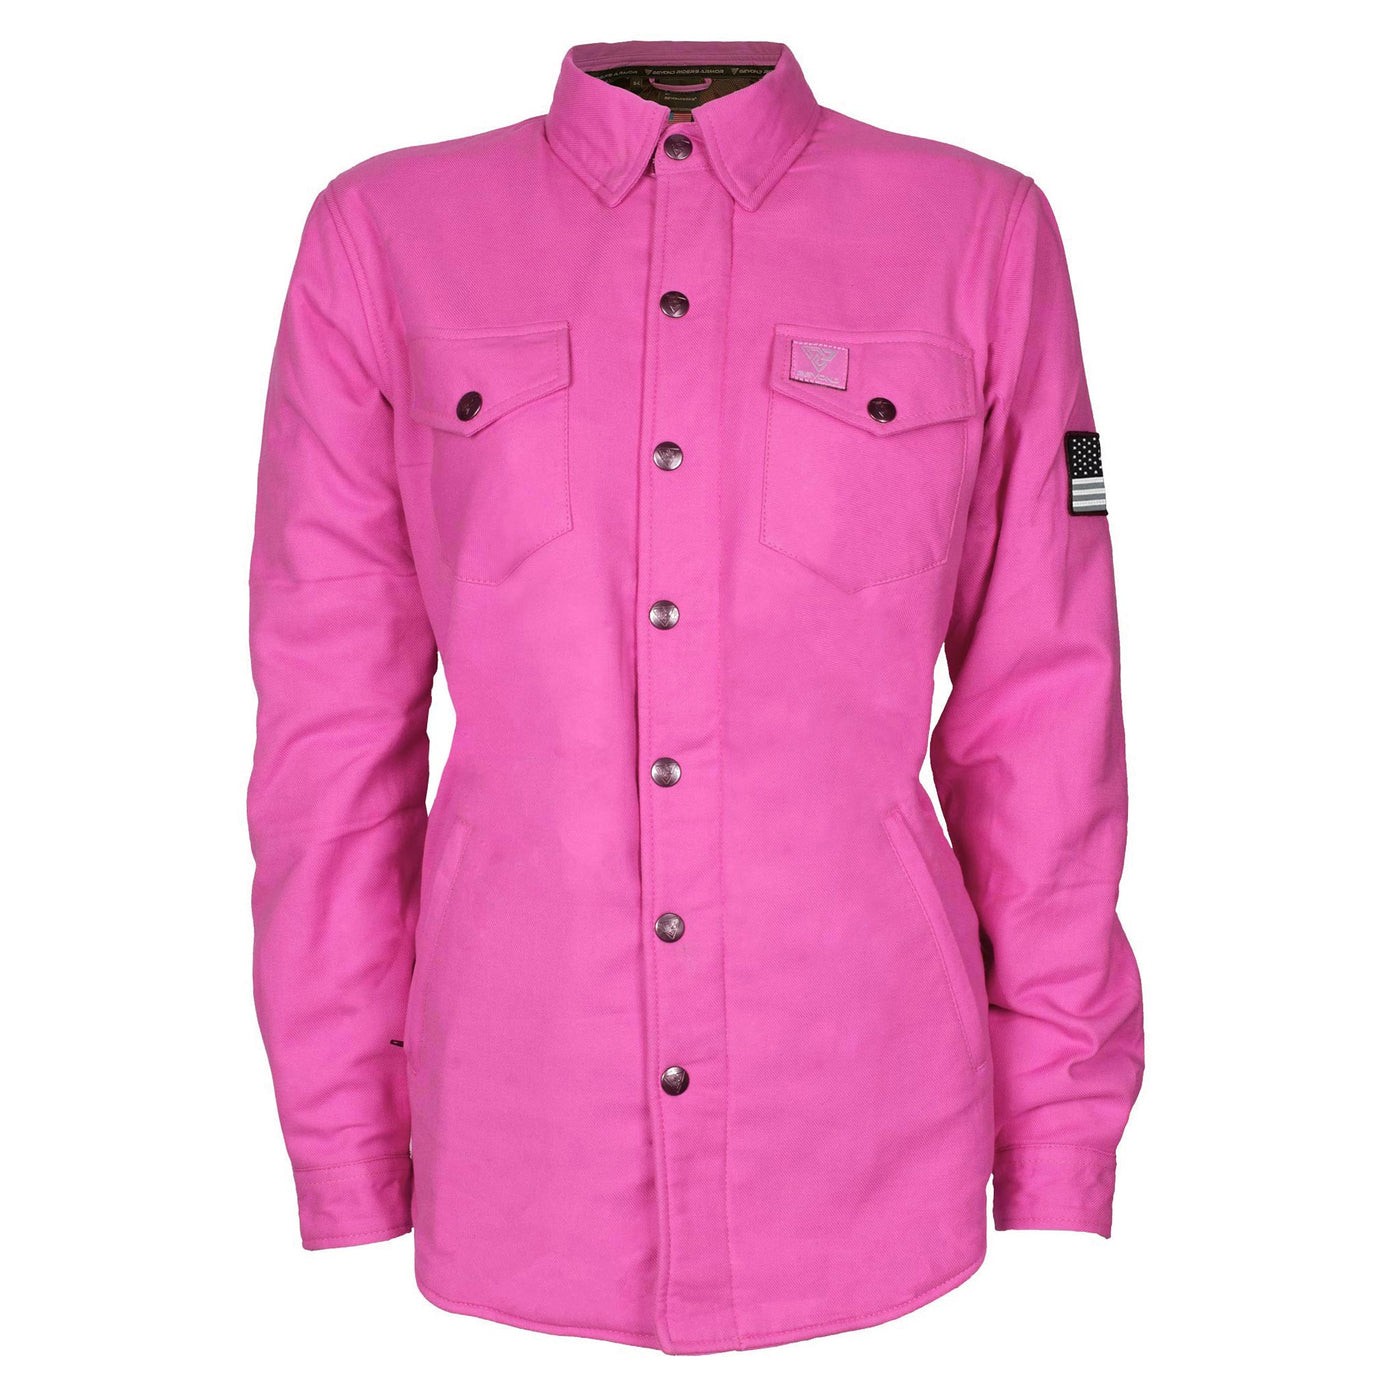 Protective Flannel Shirt with Pads for Women - Pink Solid